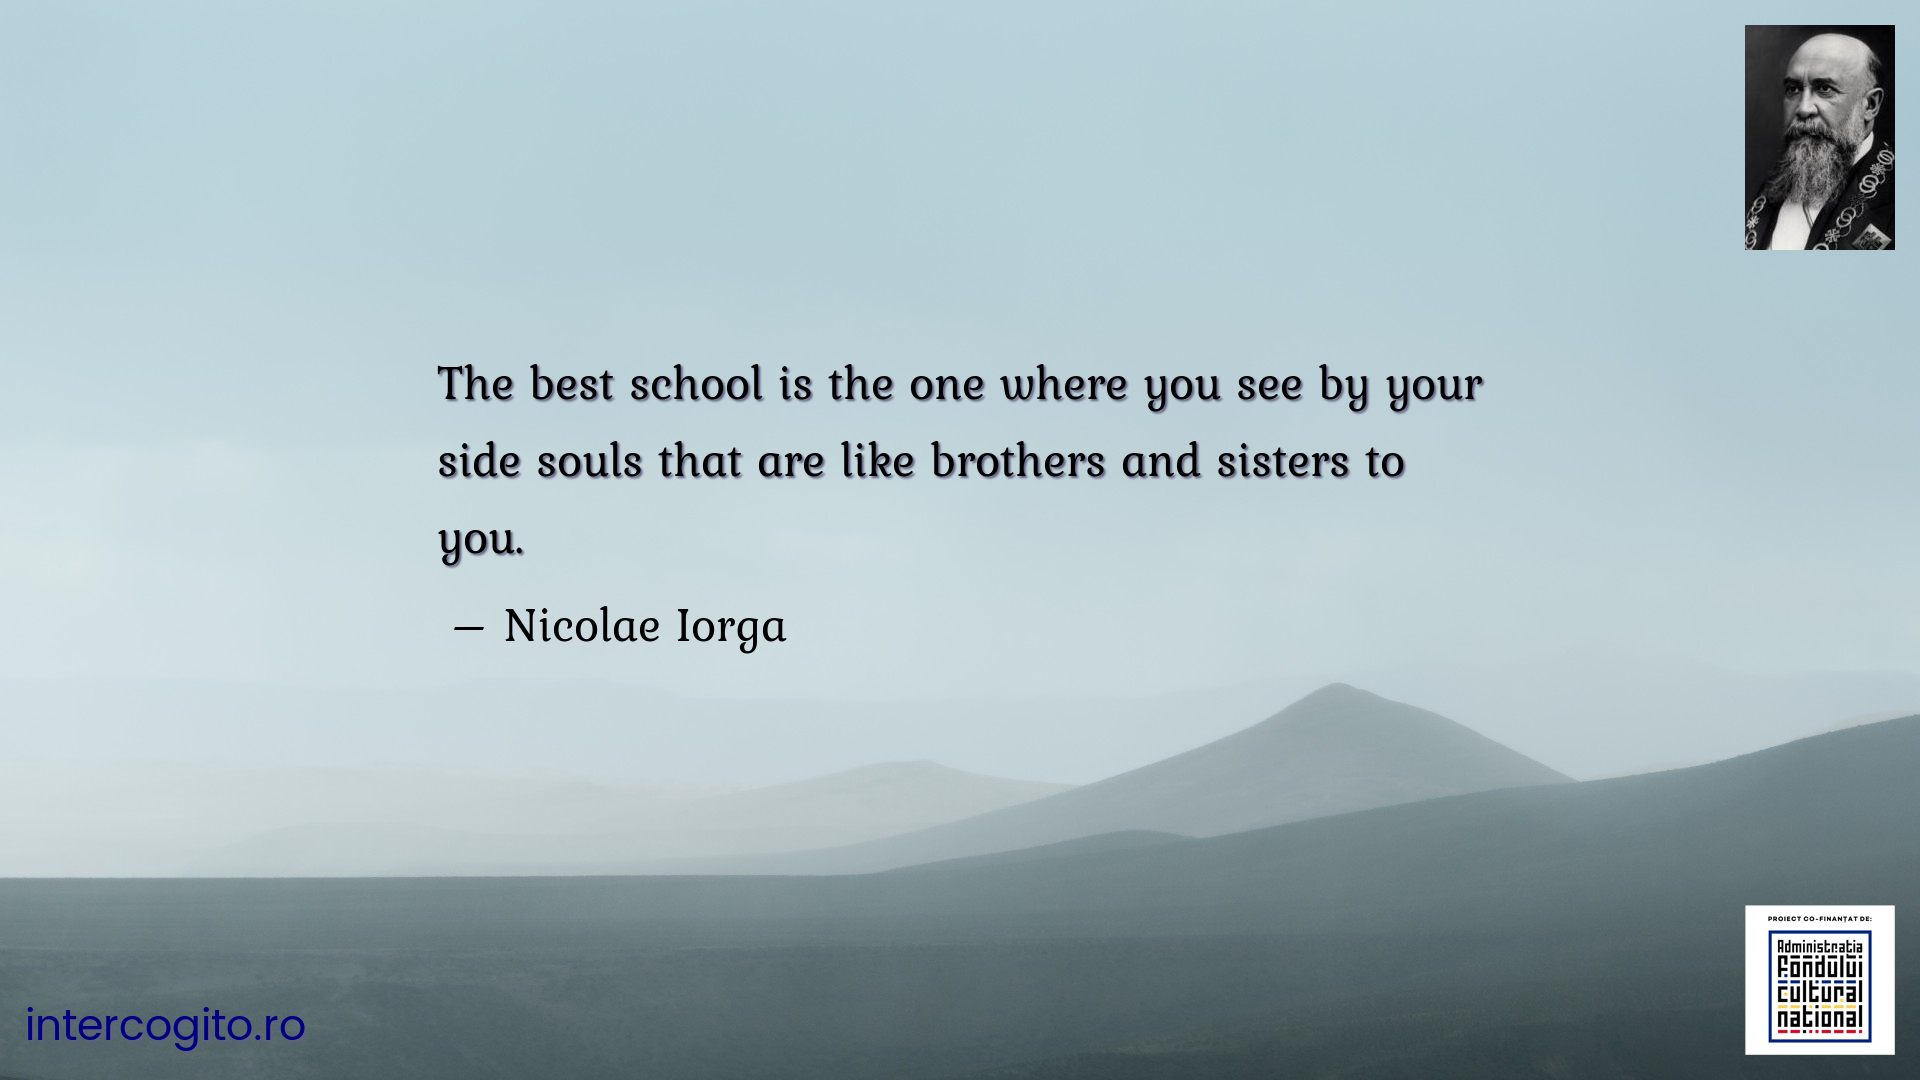 The best school is the one where you see by your side souls that are like brothers and sisters to you.